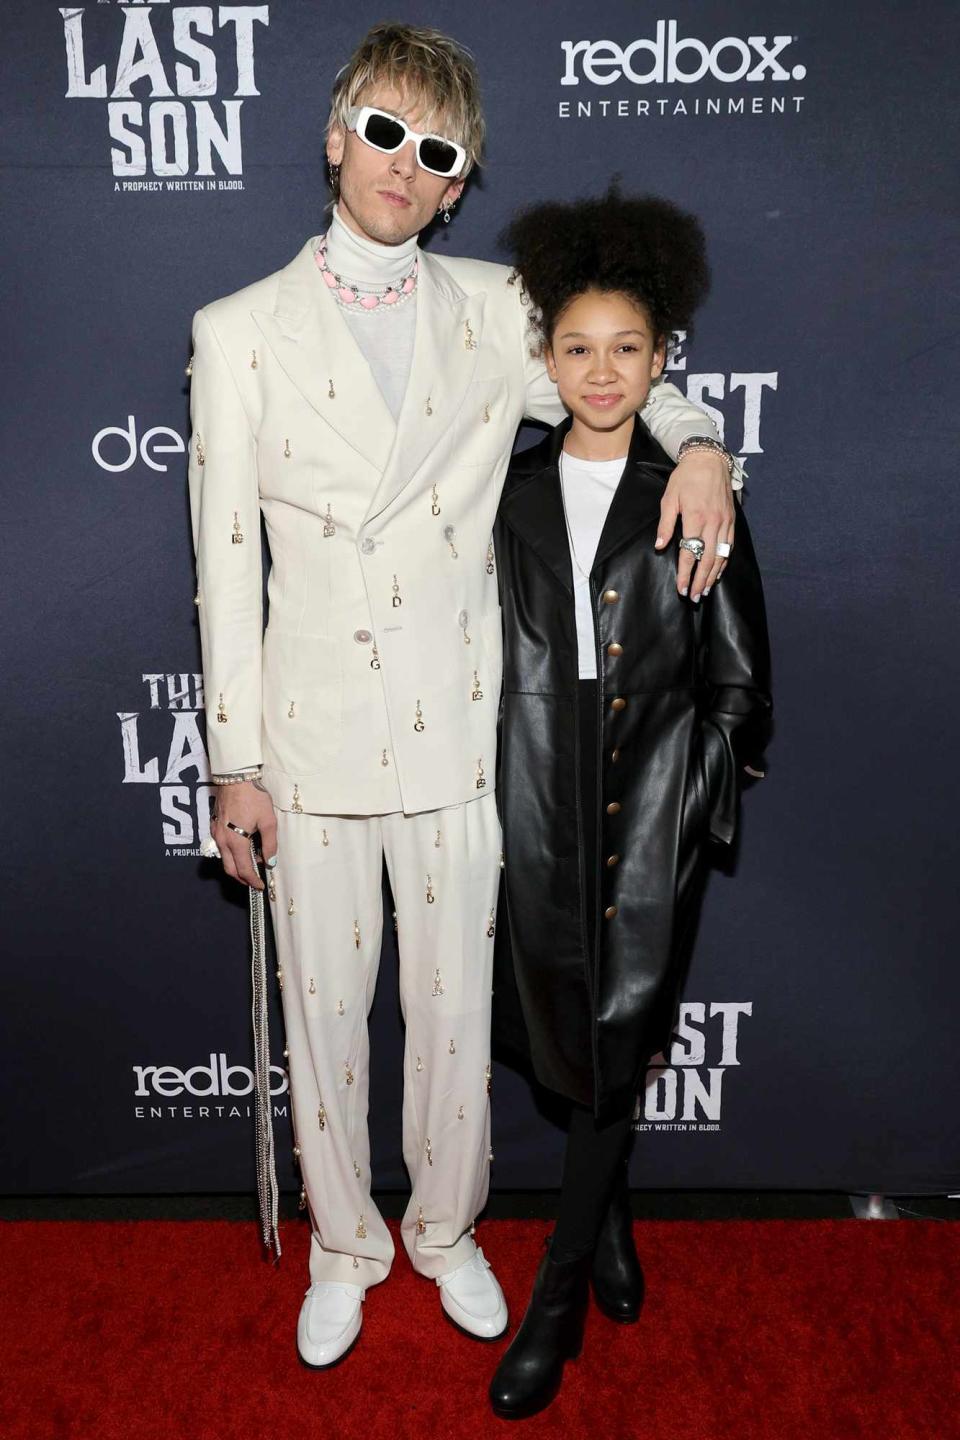 Colson Baker and Casie Baker attend as Redbox hosts red carpet screening for upcoming western film "The Last Son" at IPIC, Fulton Market on December 02, 2021 in New York City